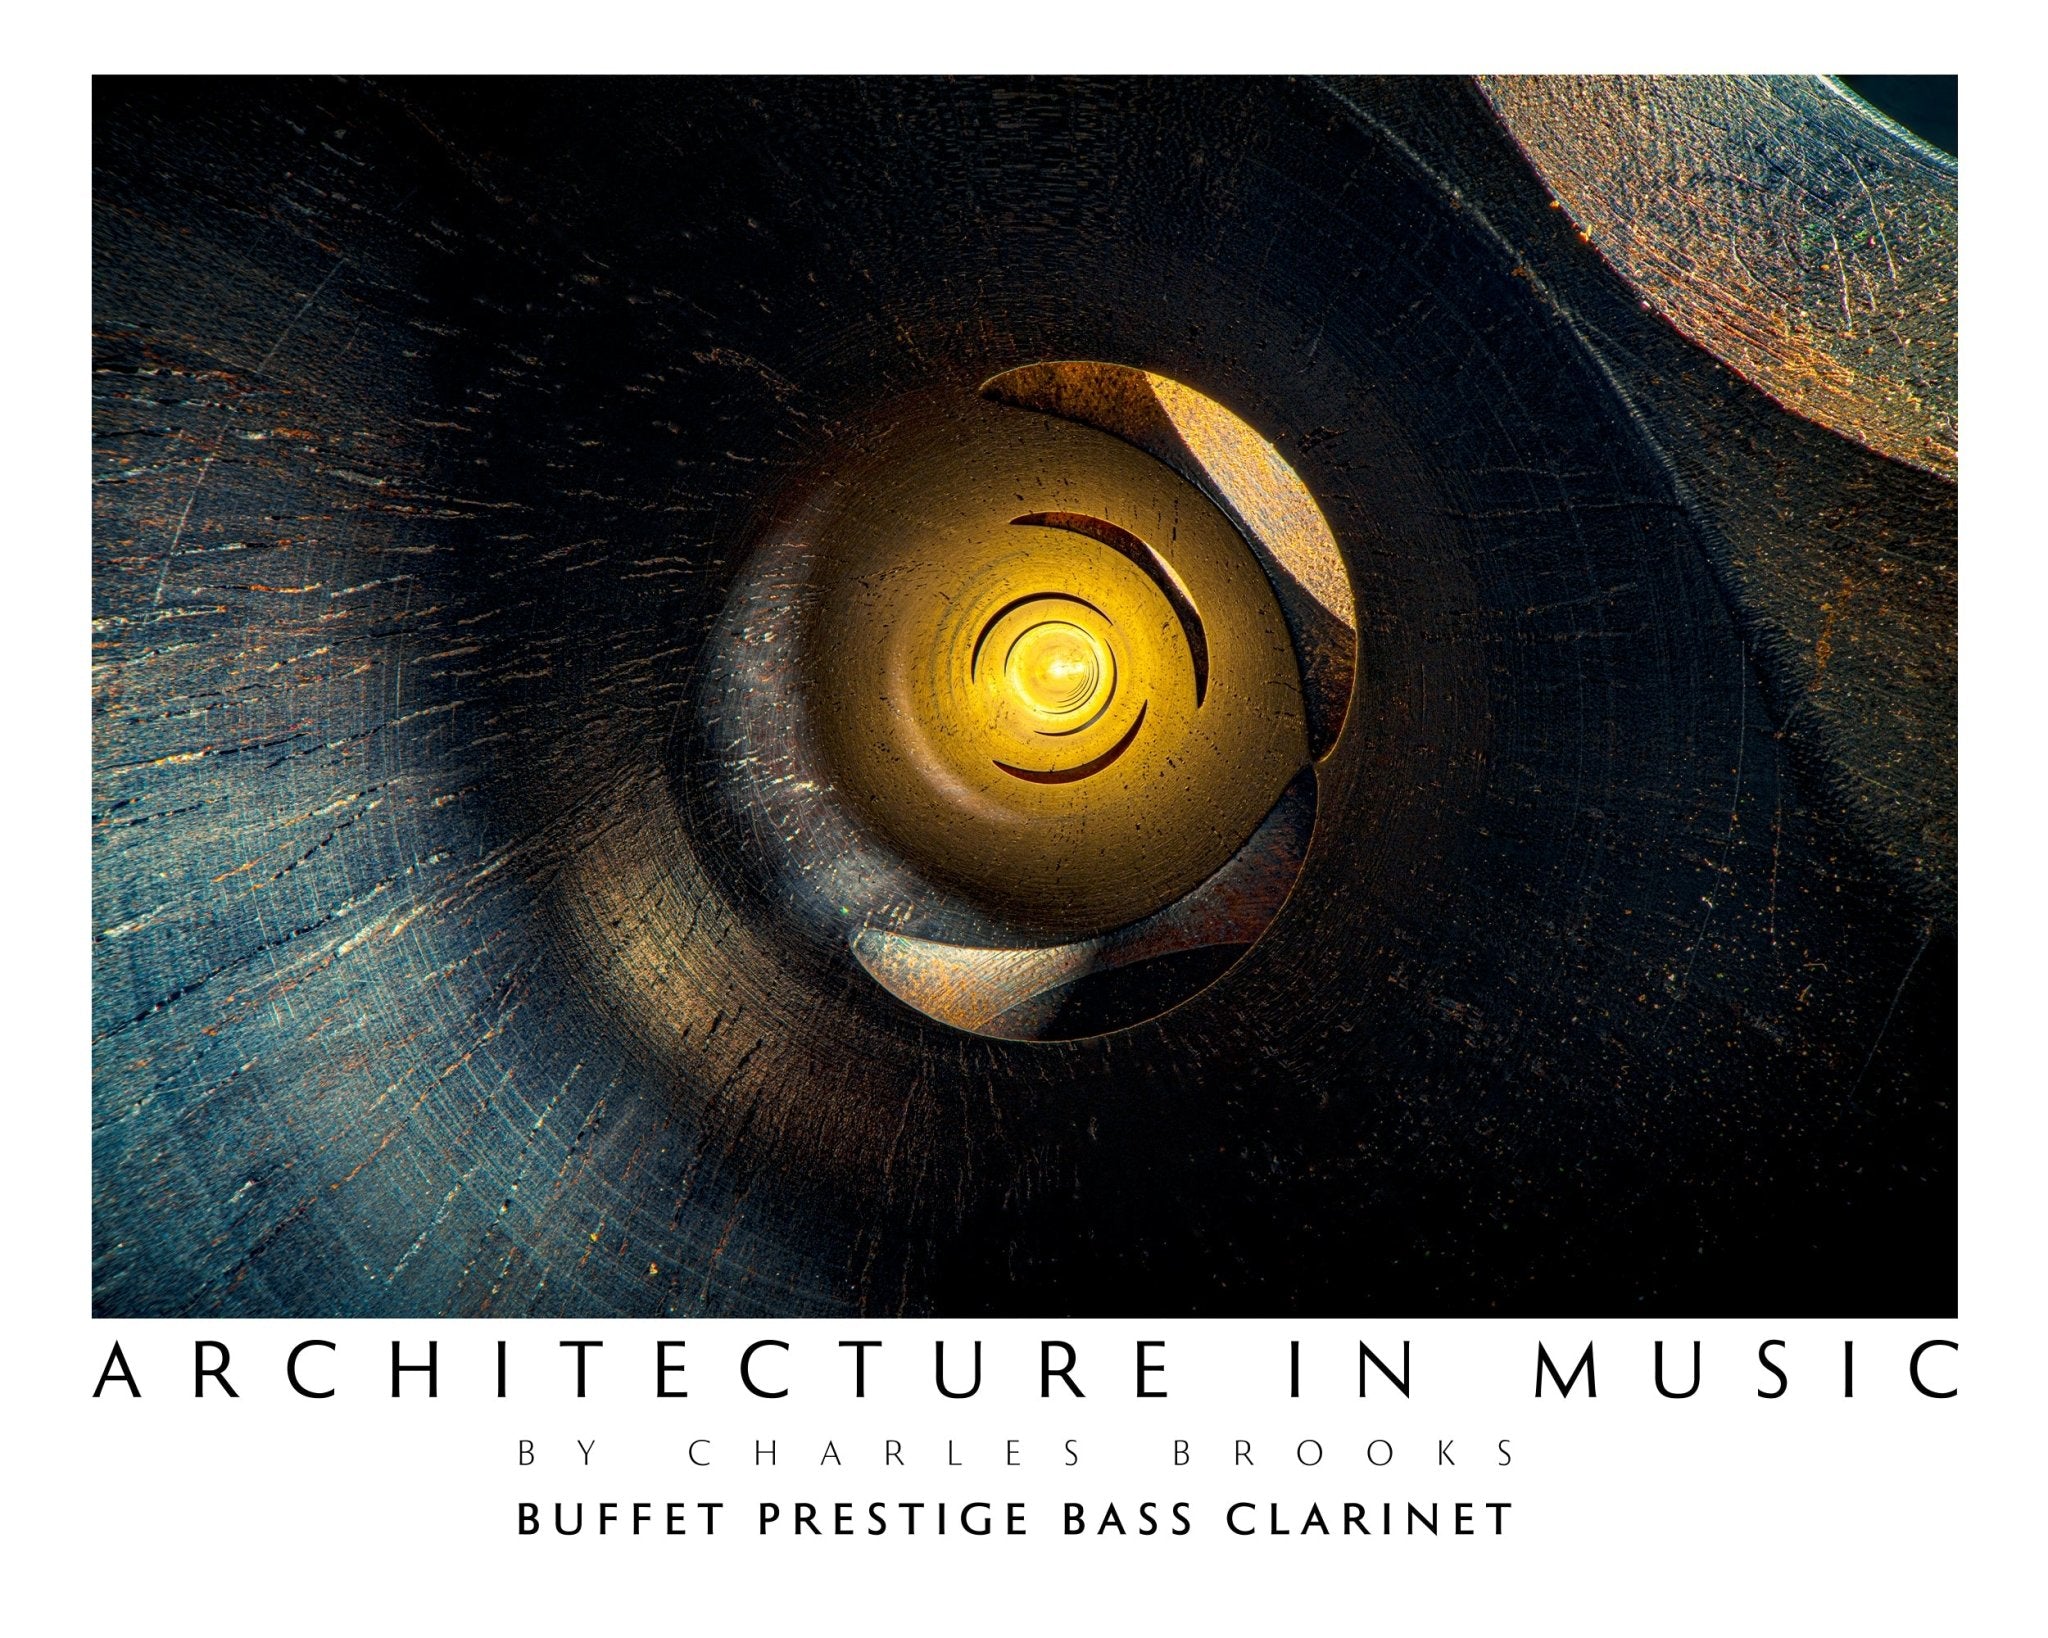 Photo of 1995 Low C Prestige Bass Clarinet Part 1. High Quality Poster. - Giclée Poster Print - Architecture In Music